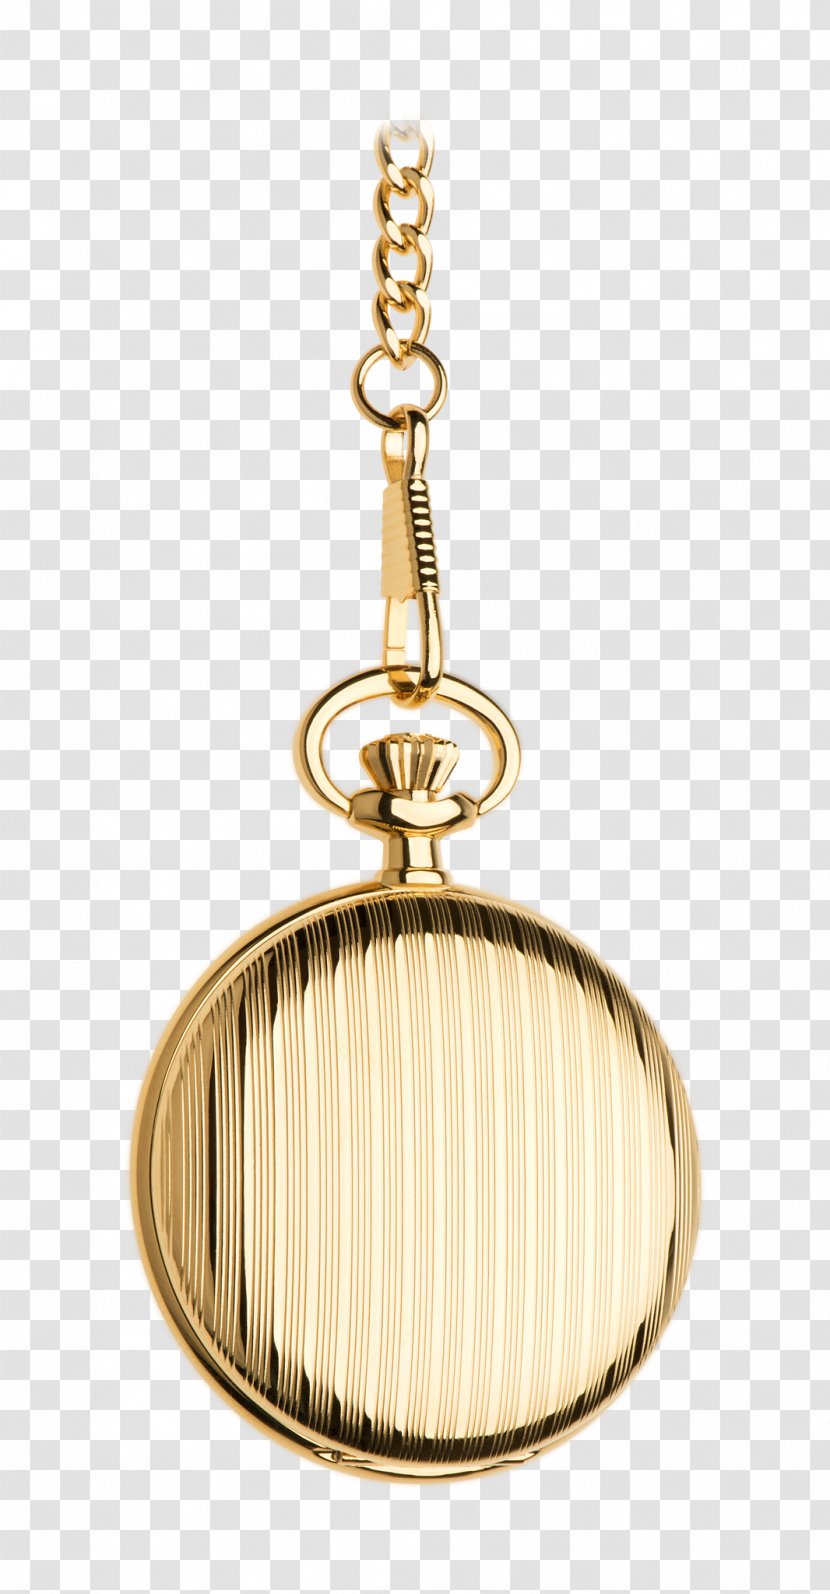 Ceneo S.A. Pocket Watch Jewellery Locket - Silver Transparent PNG